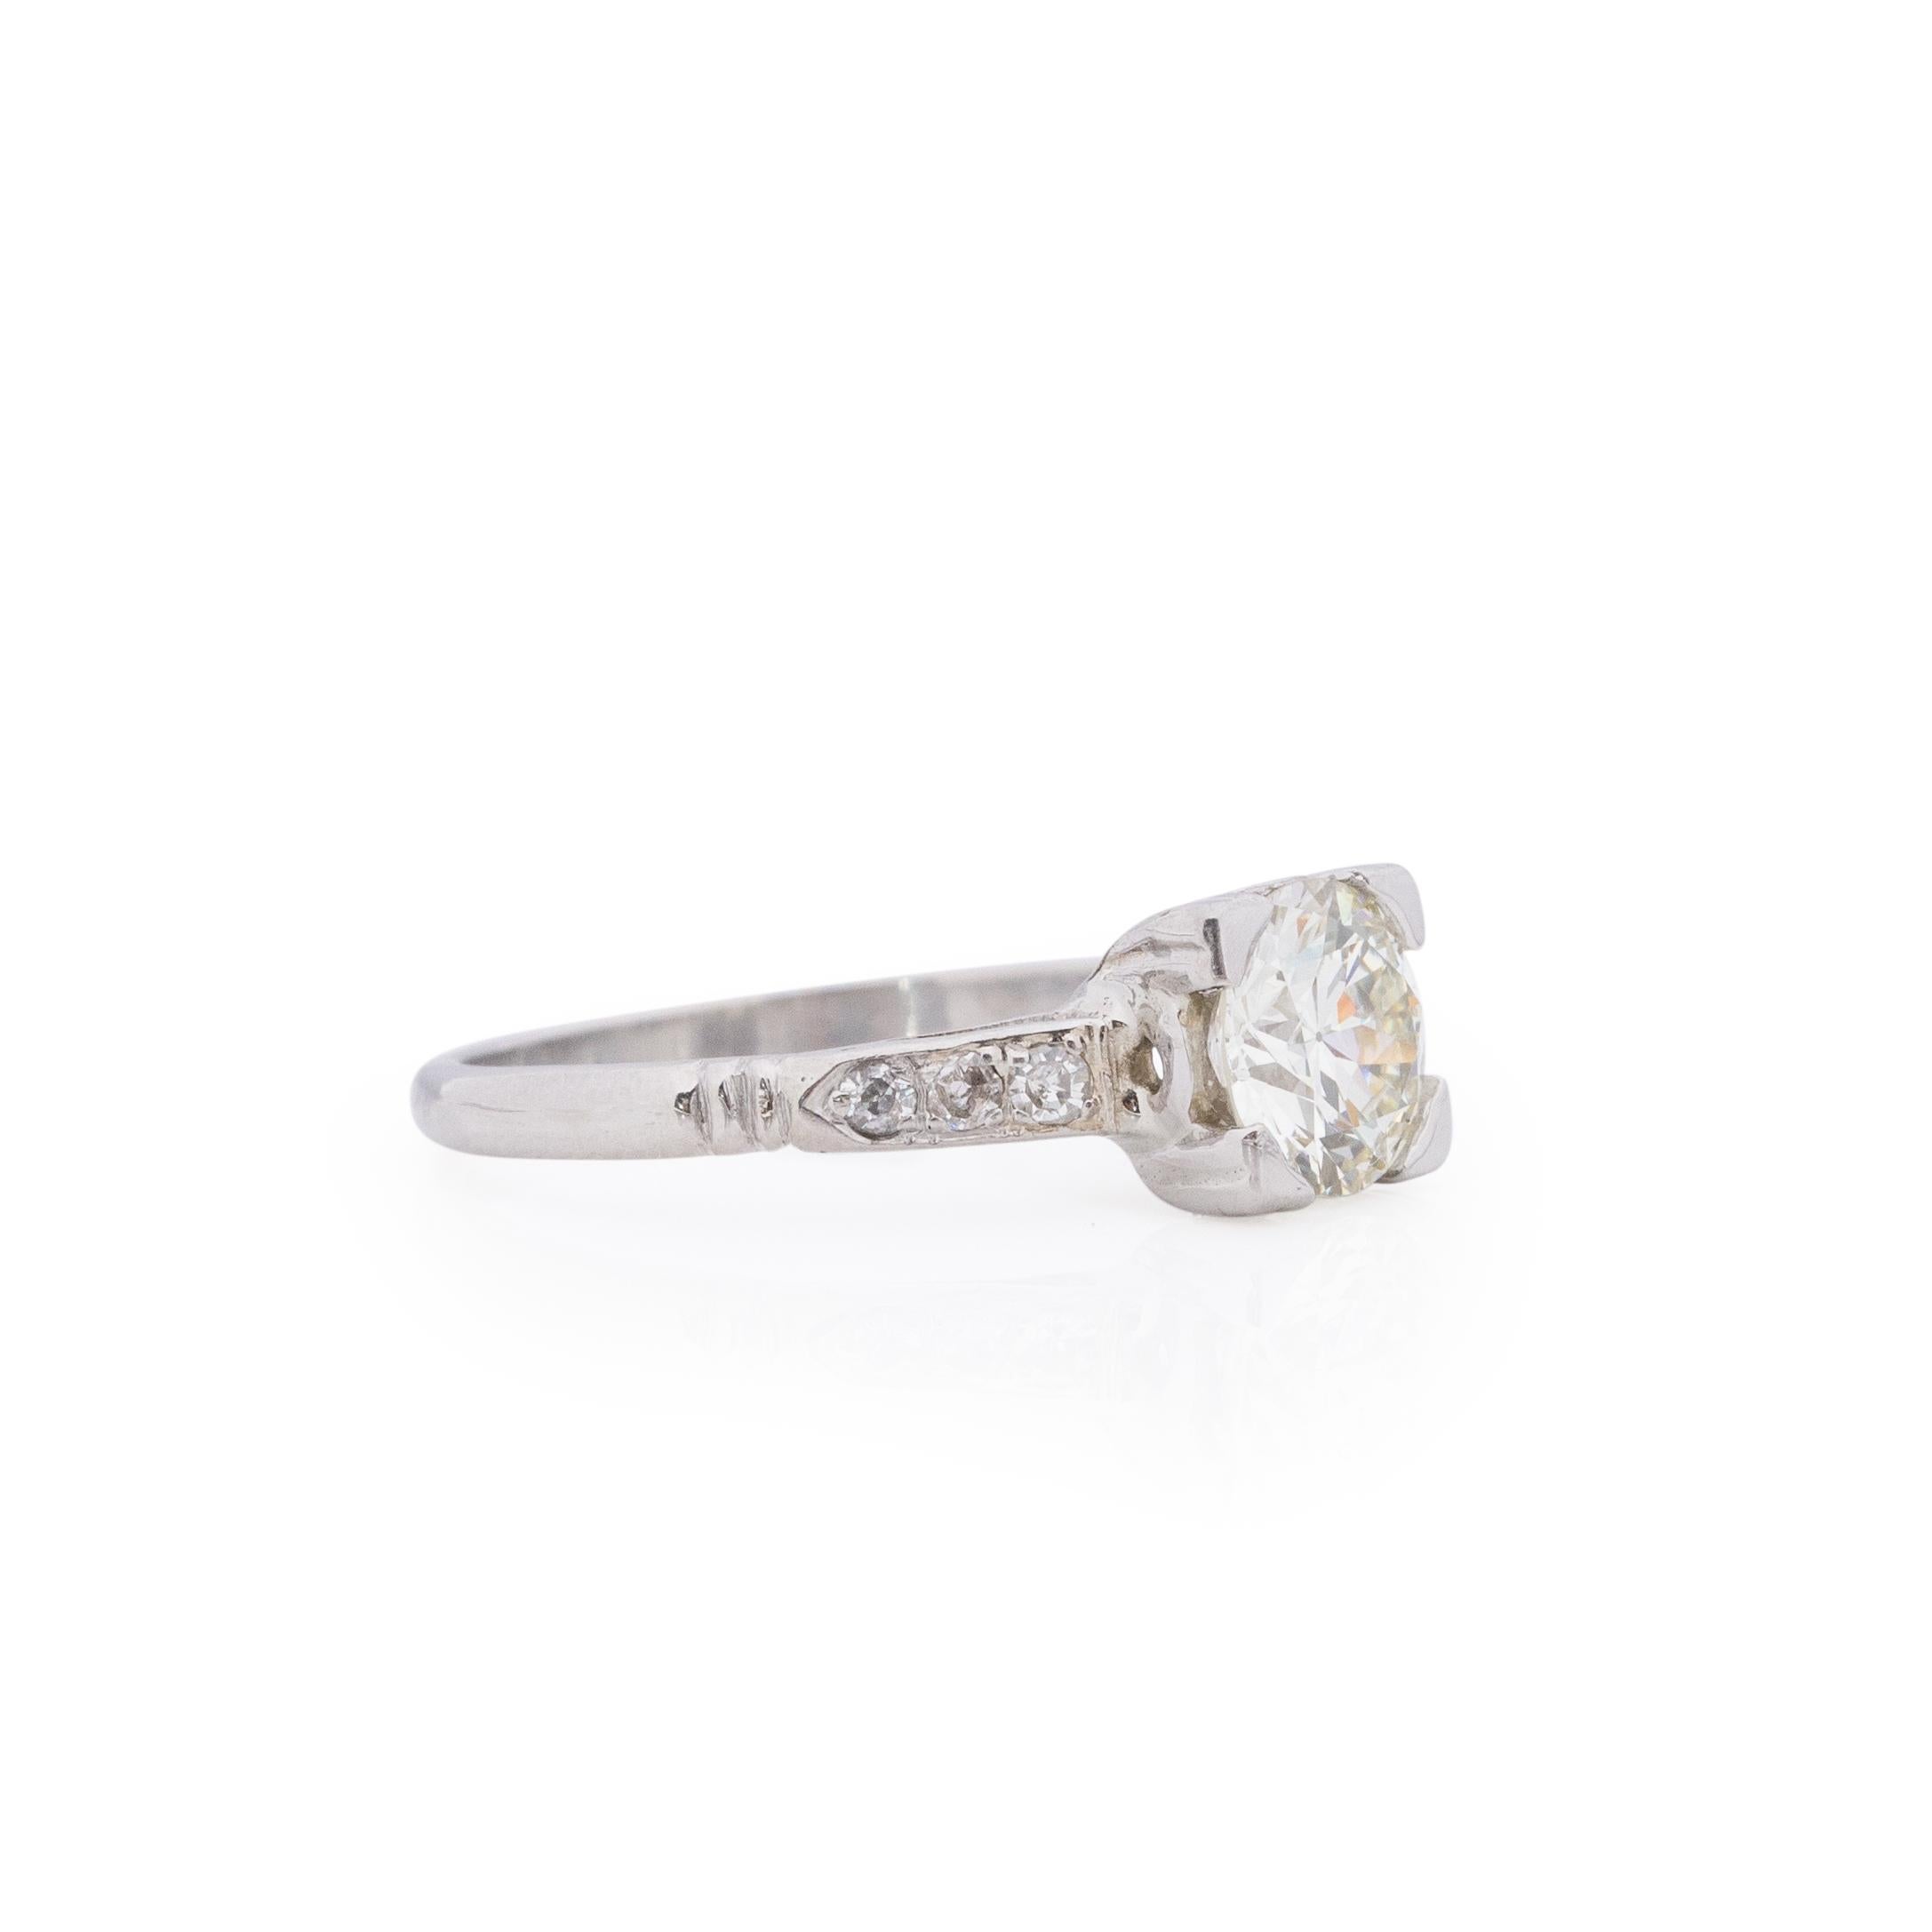 This art deco solitaire ring is a beauty. Crafted in platinum, the simple and classic cathedral shanks hold six bright single cut accent diamonds. Leading to the center diamond set in a illusion head. This 1.25Ct old European cut diamond is bright